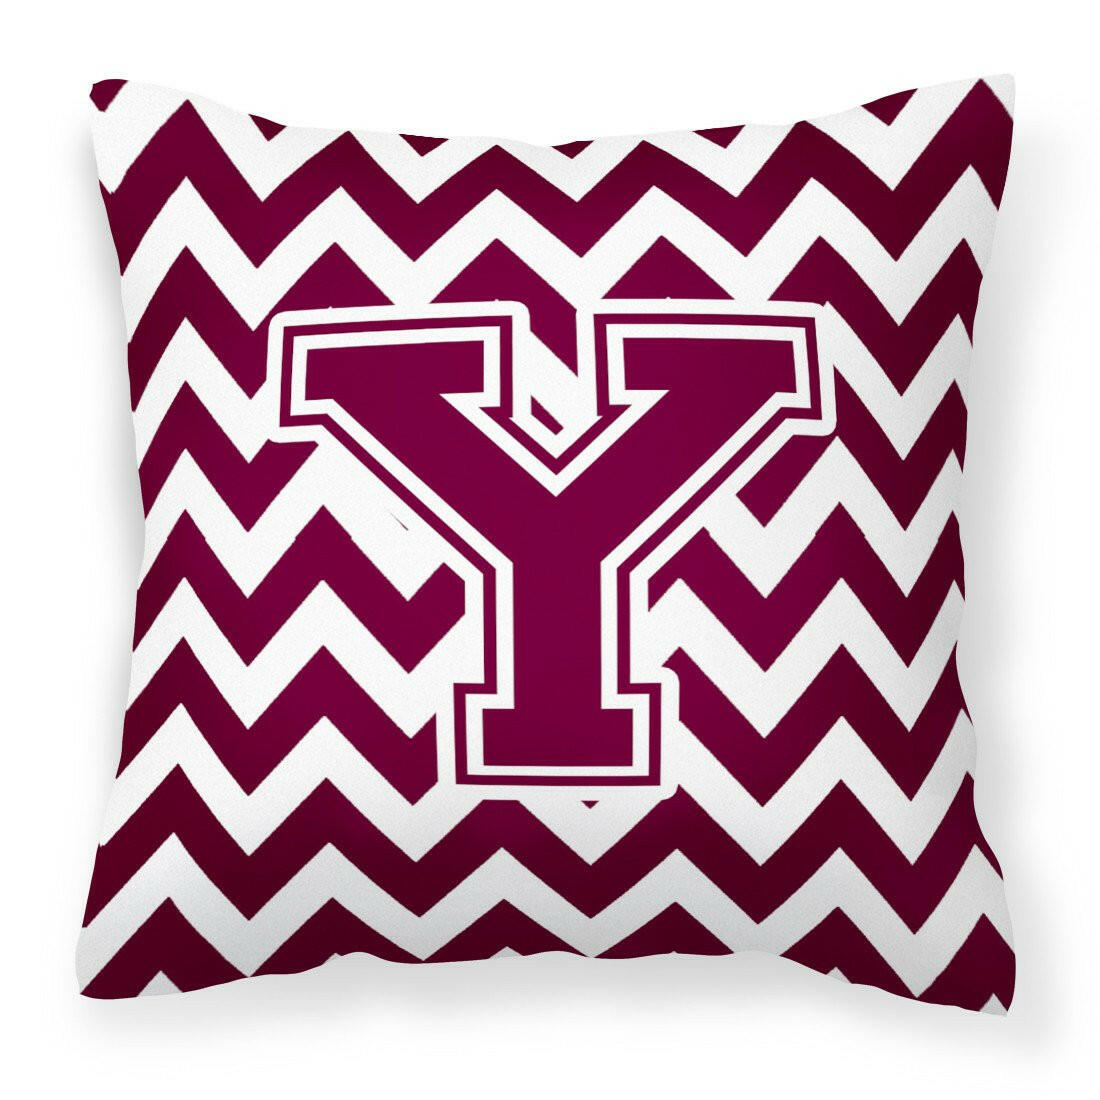 Letter Y Chevron Maroon and White  Fabric Decorative Pillow CJ1051-YPW1414 by Caroline's Treasures